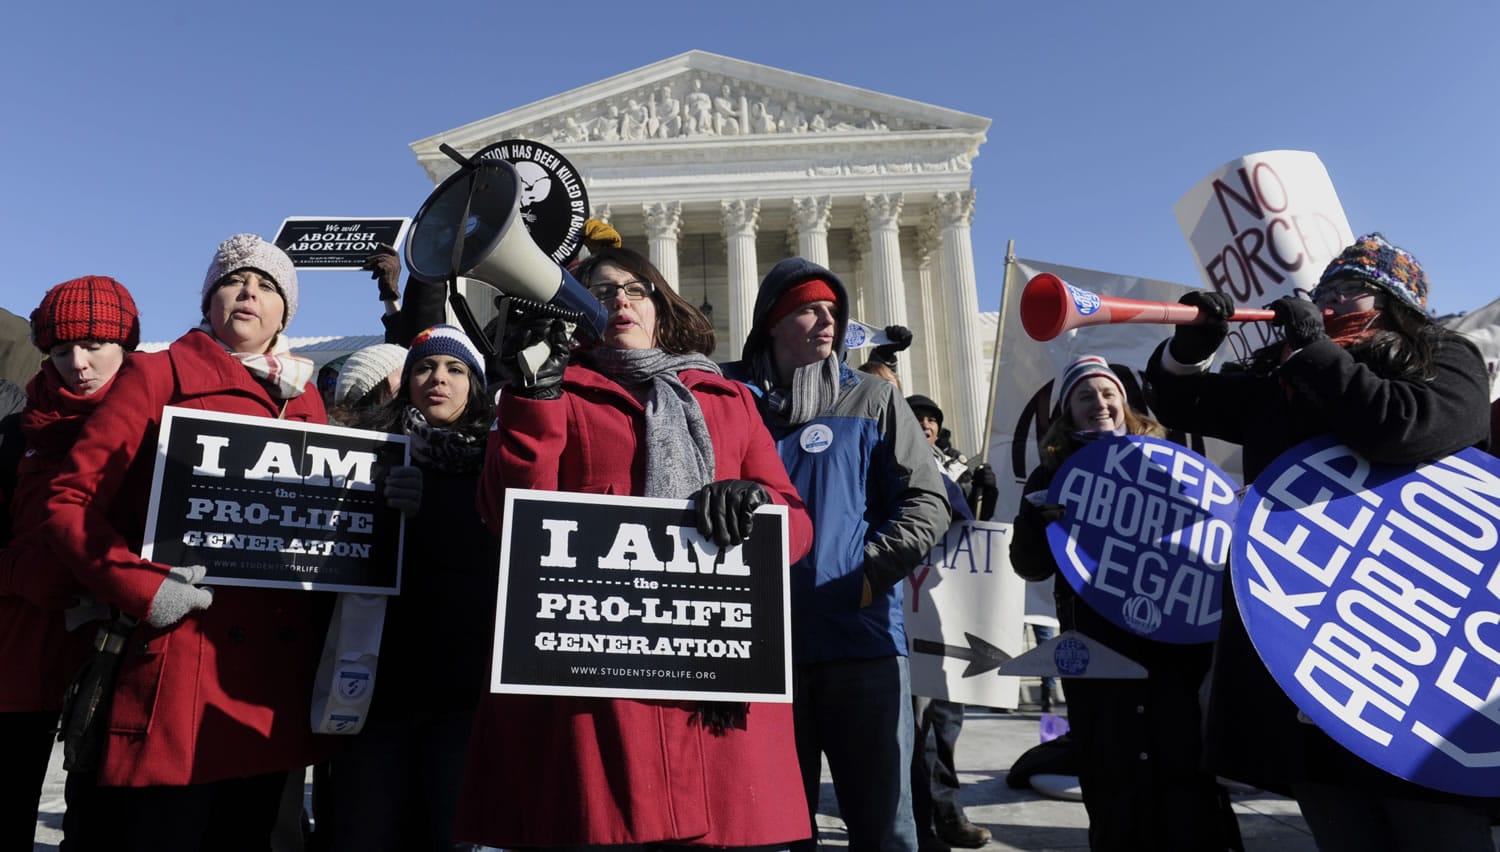 Pro-abortion and anti-abortion protestors rally outside the Supreme Court in Washington on Jan. 22 during the March for Life.